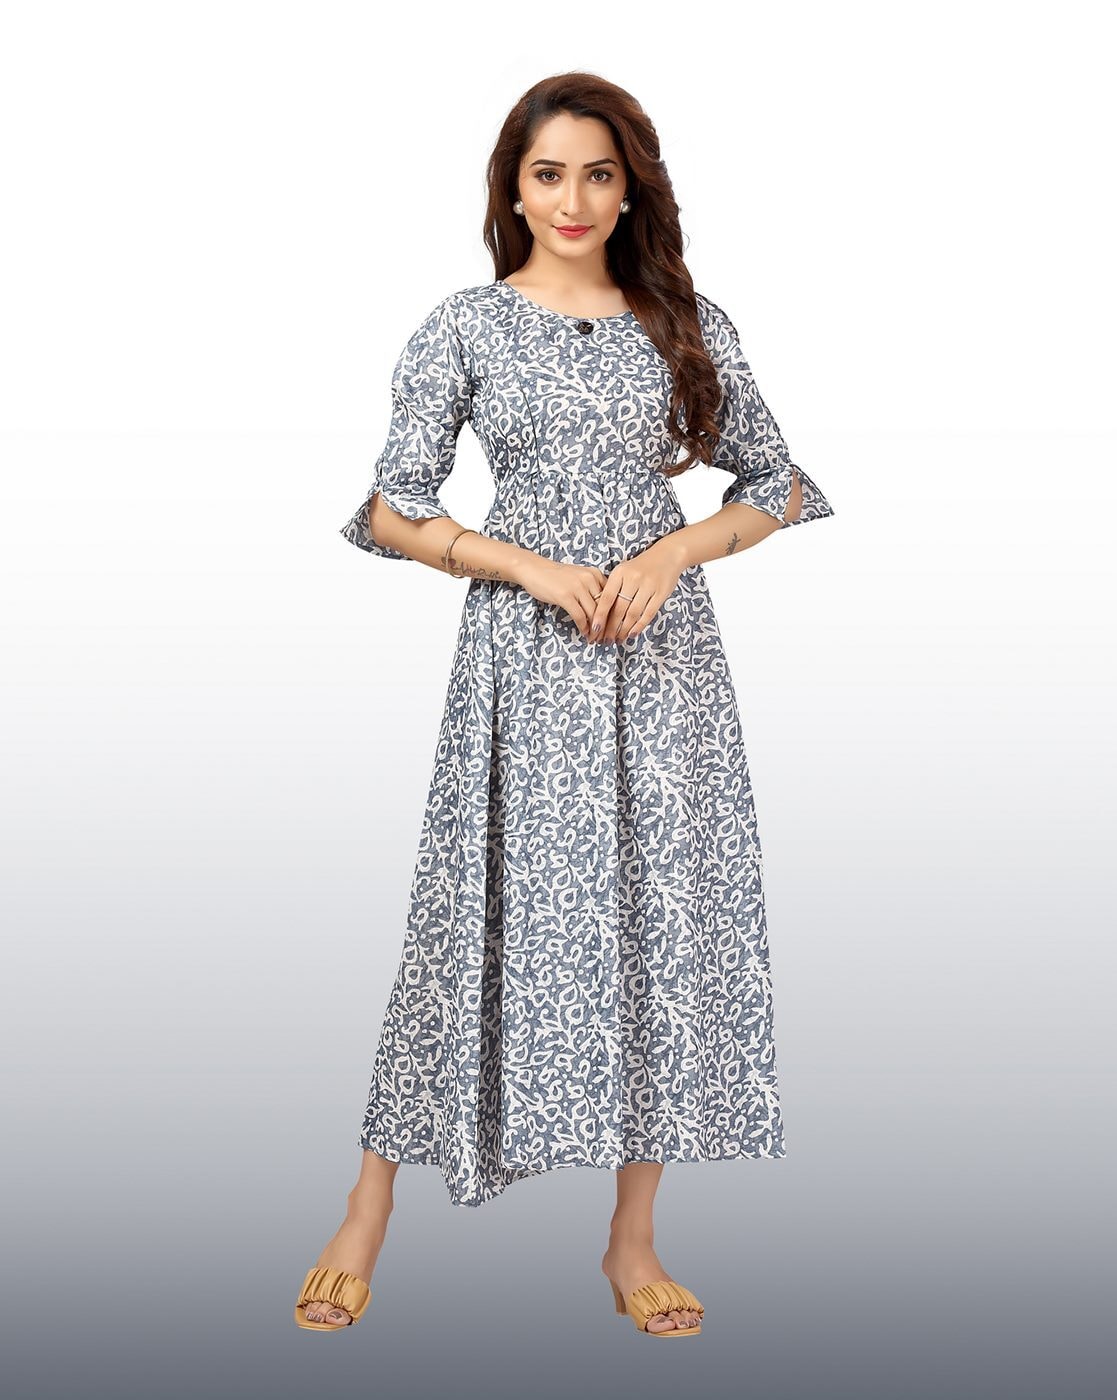 7 Kurtis Sleeves Styles & Designs Trending in 2021 – LIFESTYLE BY PS